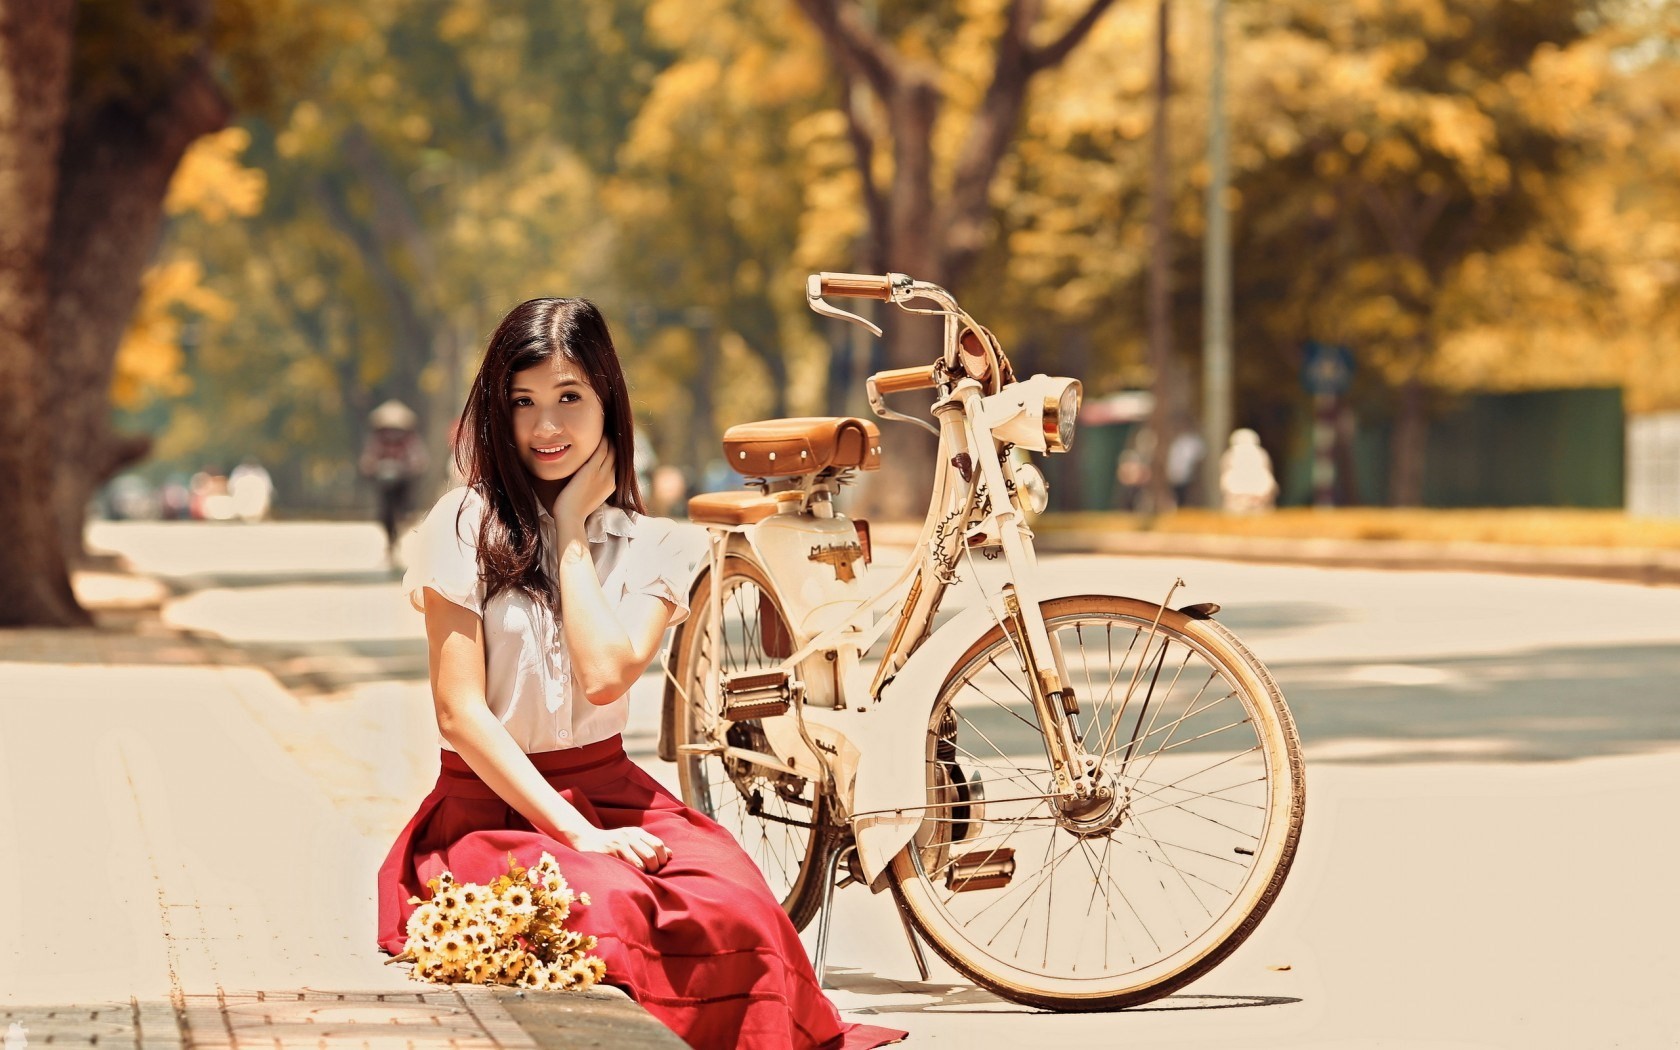 Women With Bikes Asian Women Women With Bicycles Bicycle Urban Model 1680x1050